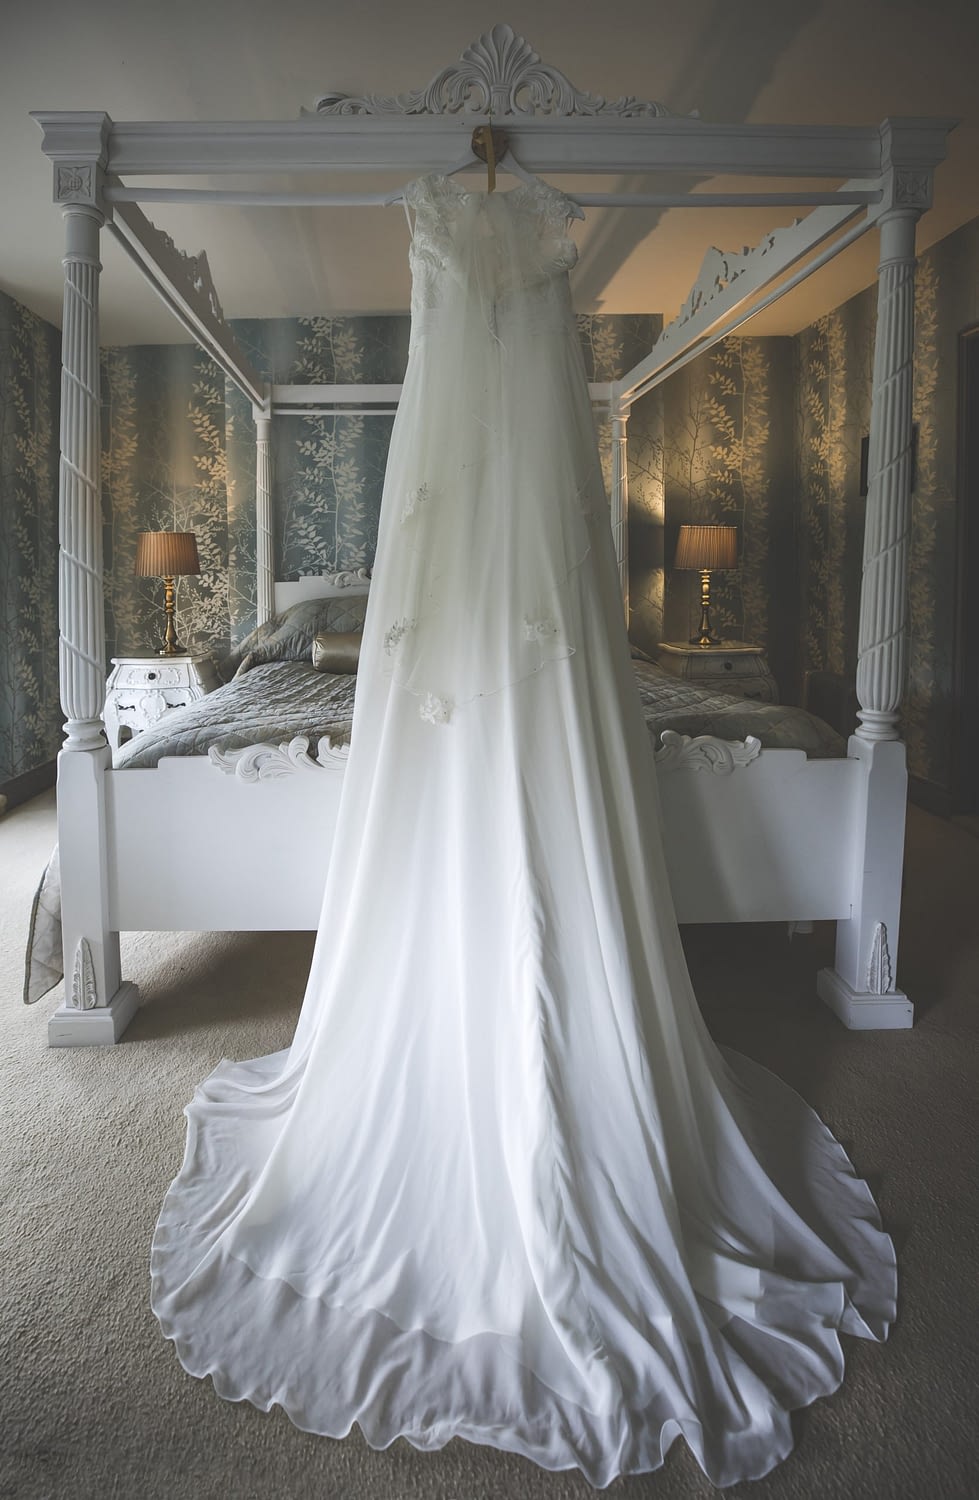 wedding gown hanging on 4 poster bed